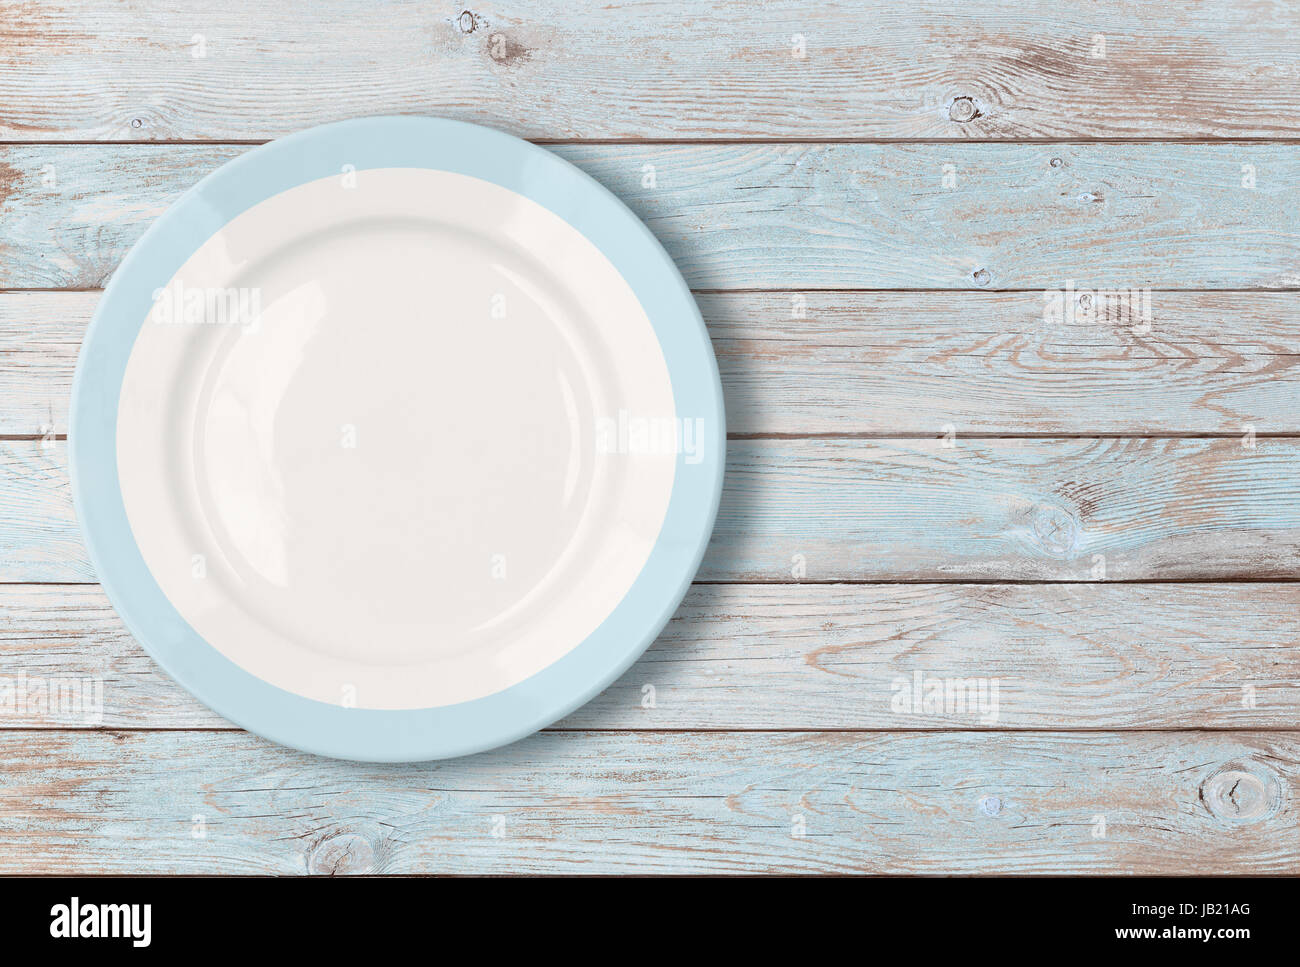 white empty dinner plate with blue border on wooden table Stock Photo